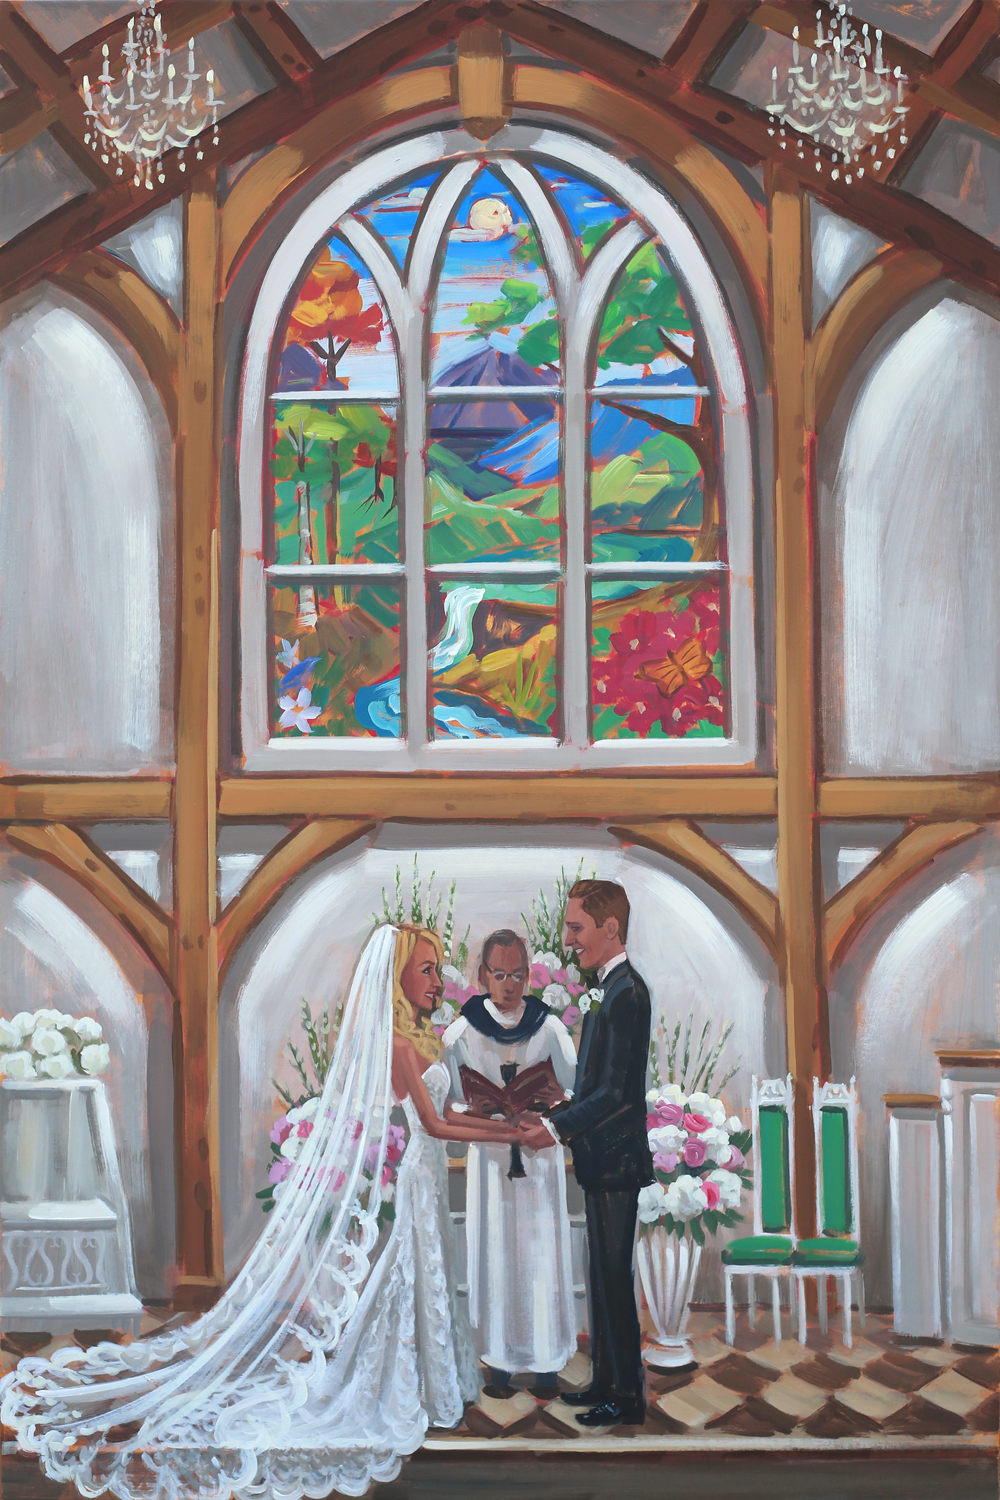 Alexandra + Jeff's vows captured on canvas by Live Wedding Painter, Ben Keys, of Wed on Canvas.